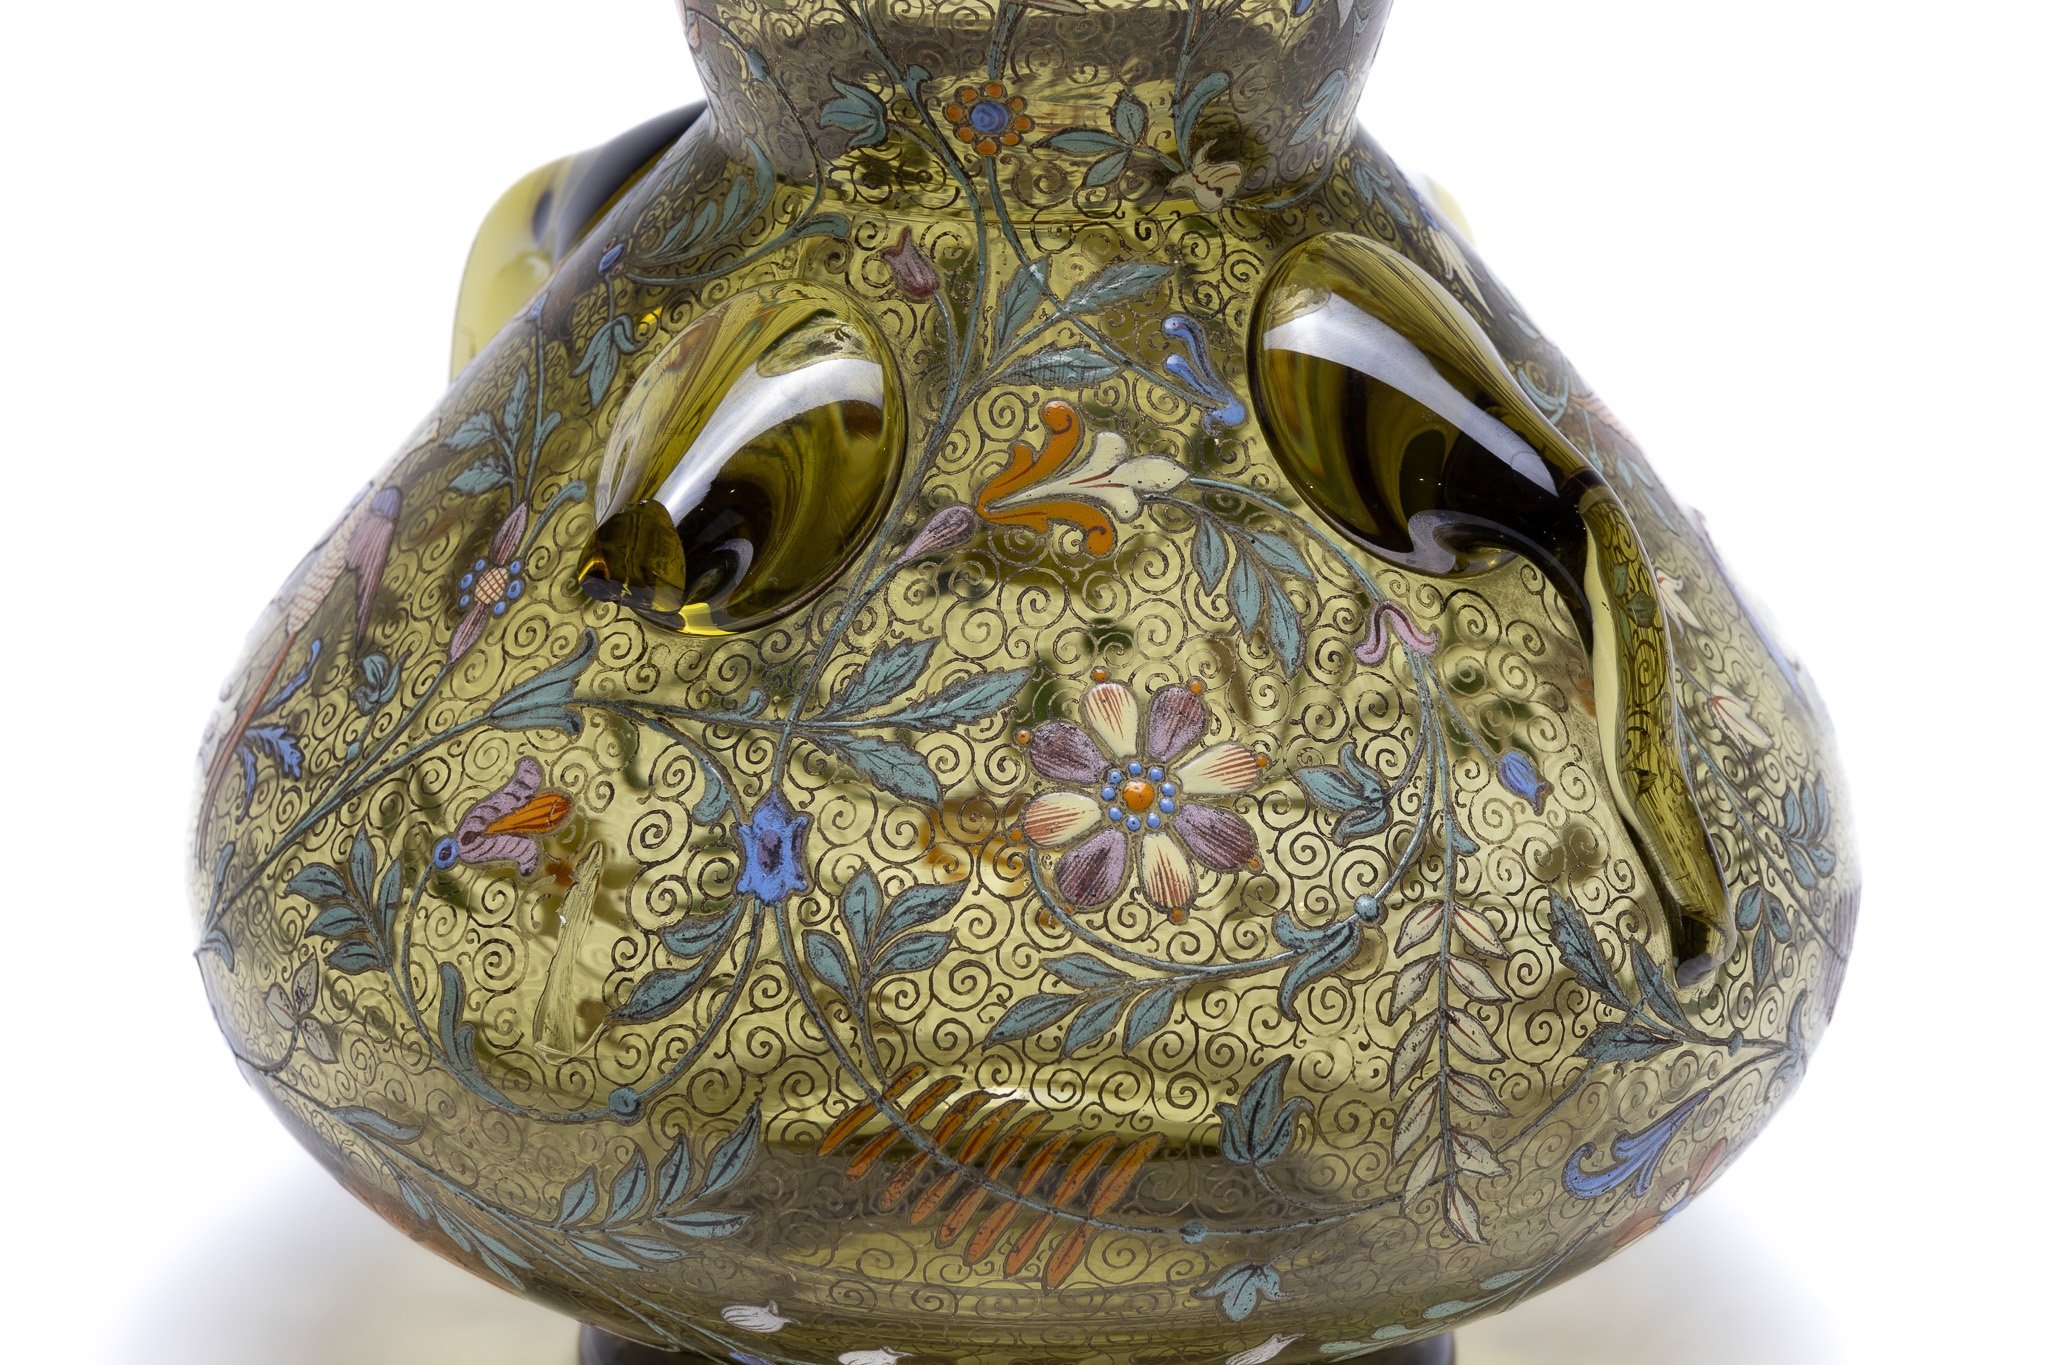 An Antique Enamel and Gilted Glass Mosque Lamp from the 19th Century.  - Image 3 of 3